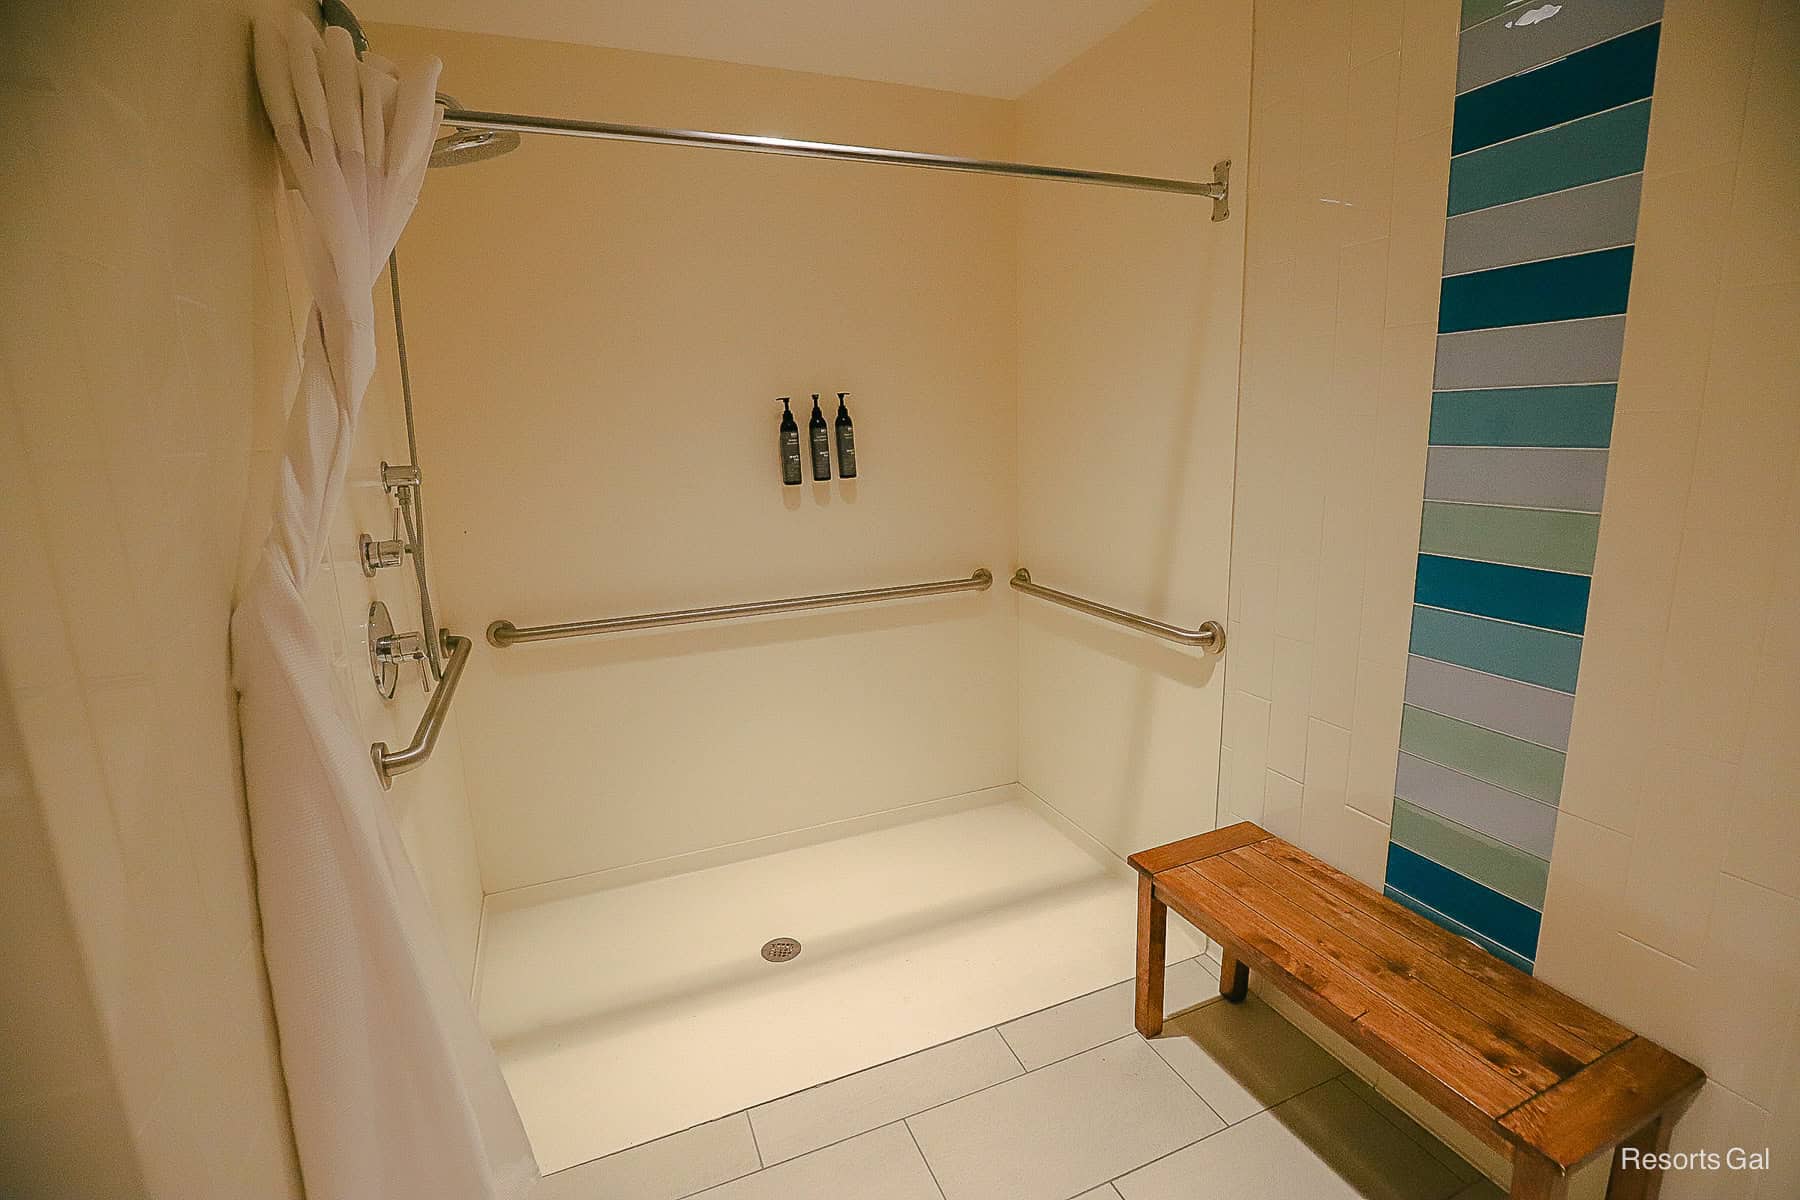 shows an accessible shower 